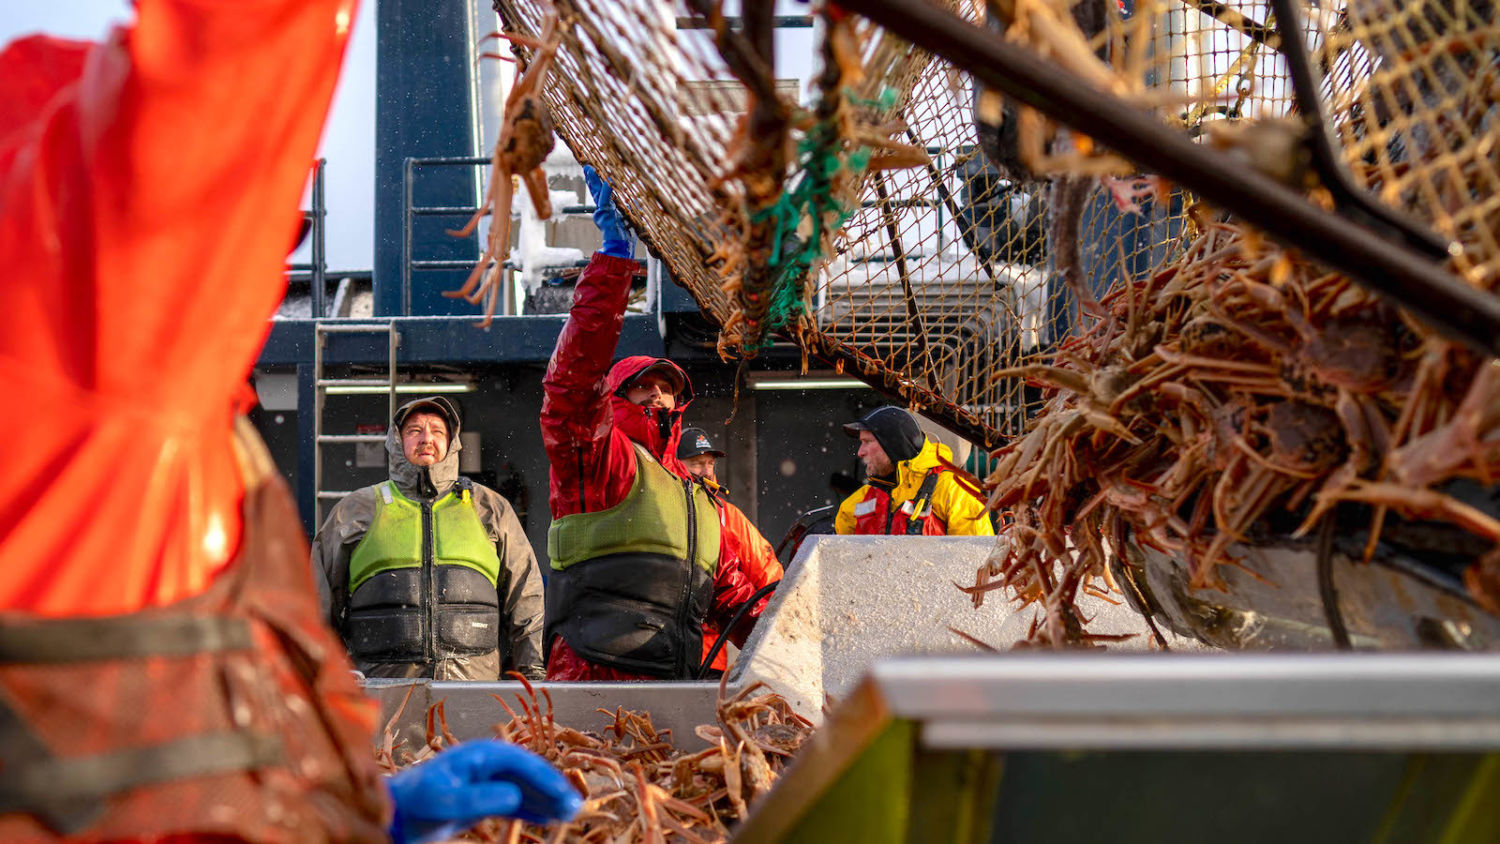 How Warming Ruined a Crab Fishery and Hurt an Alaskan Town - Yale E360